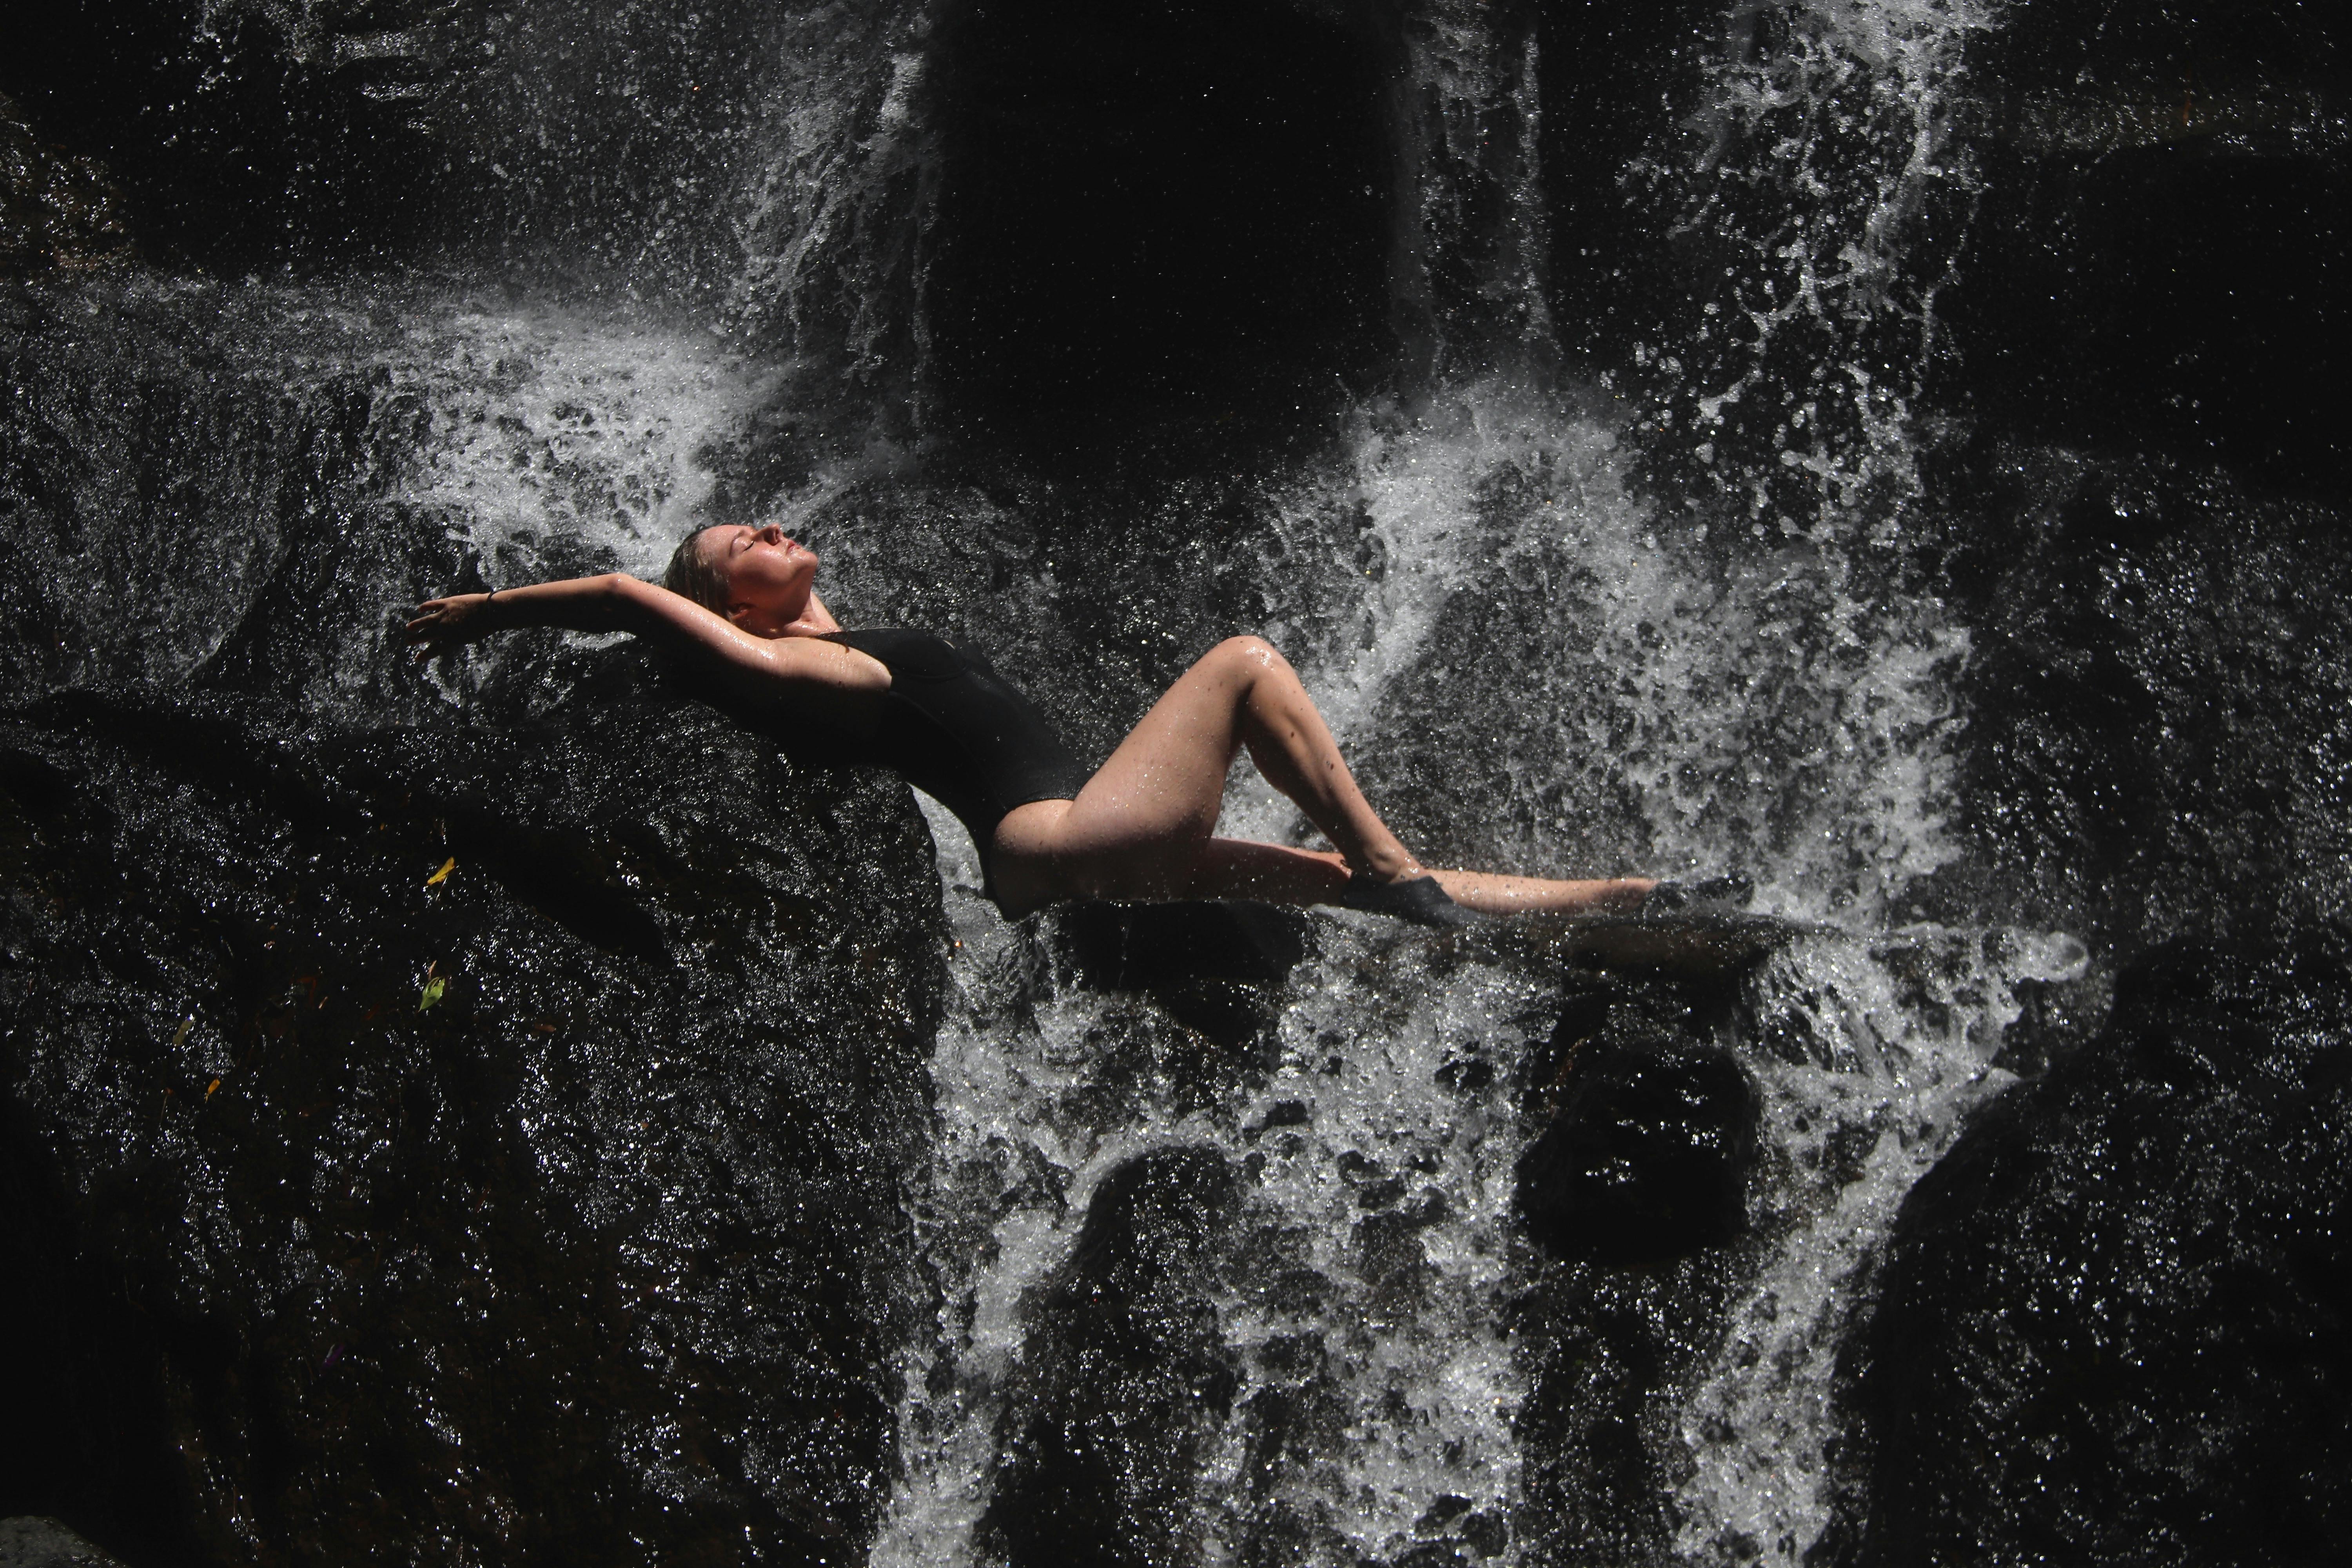 Slim Girl Poses on Round Rock against Waterfall, Nature Stock Footage ft.  backside & exercise - Envato Elements